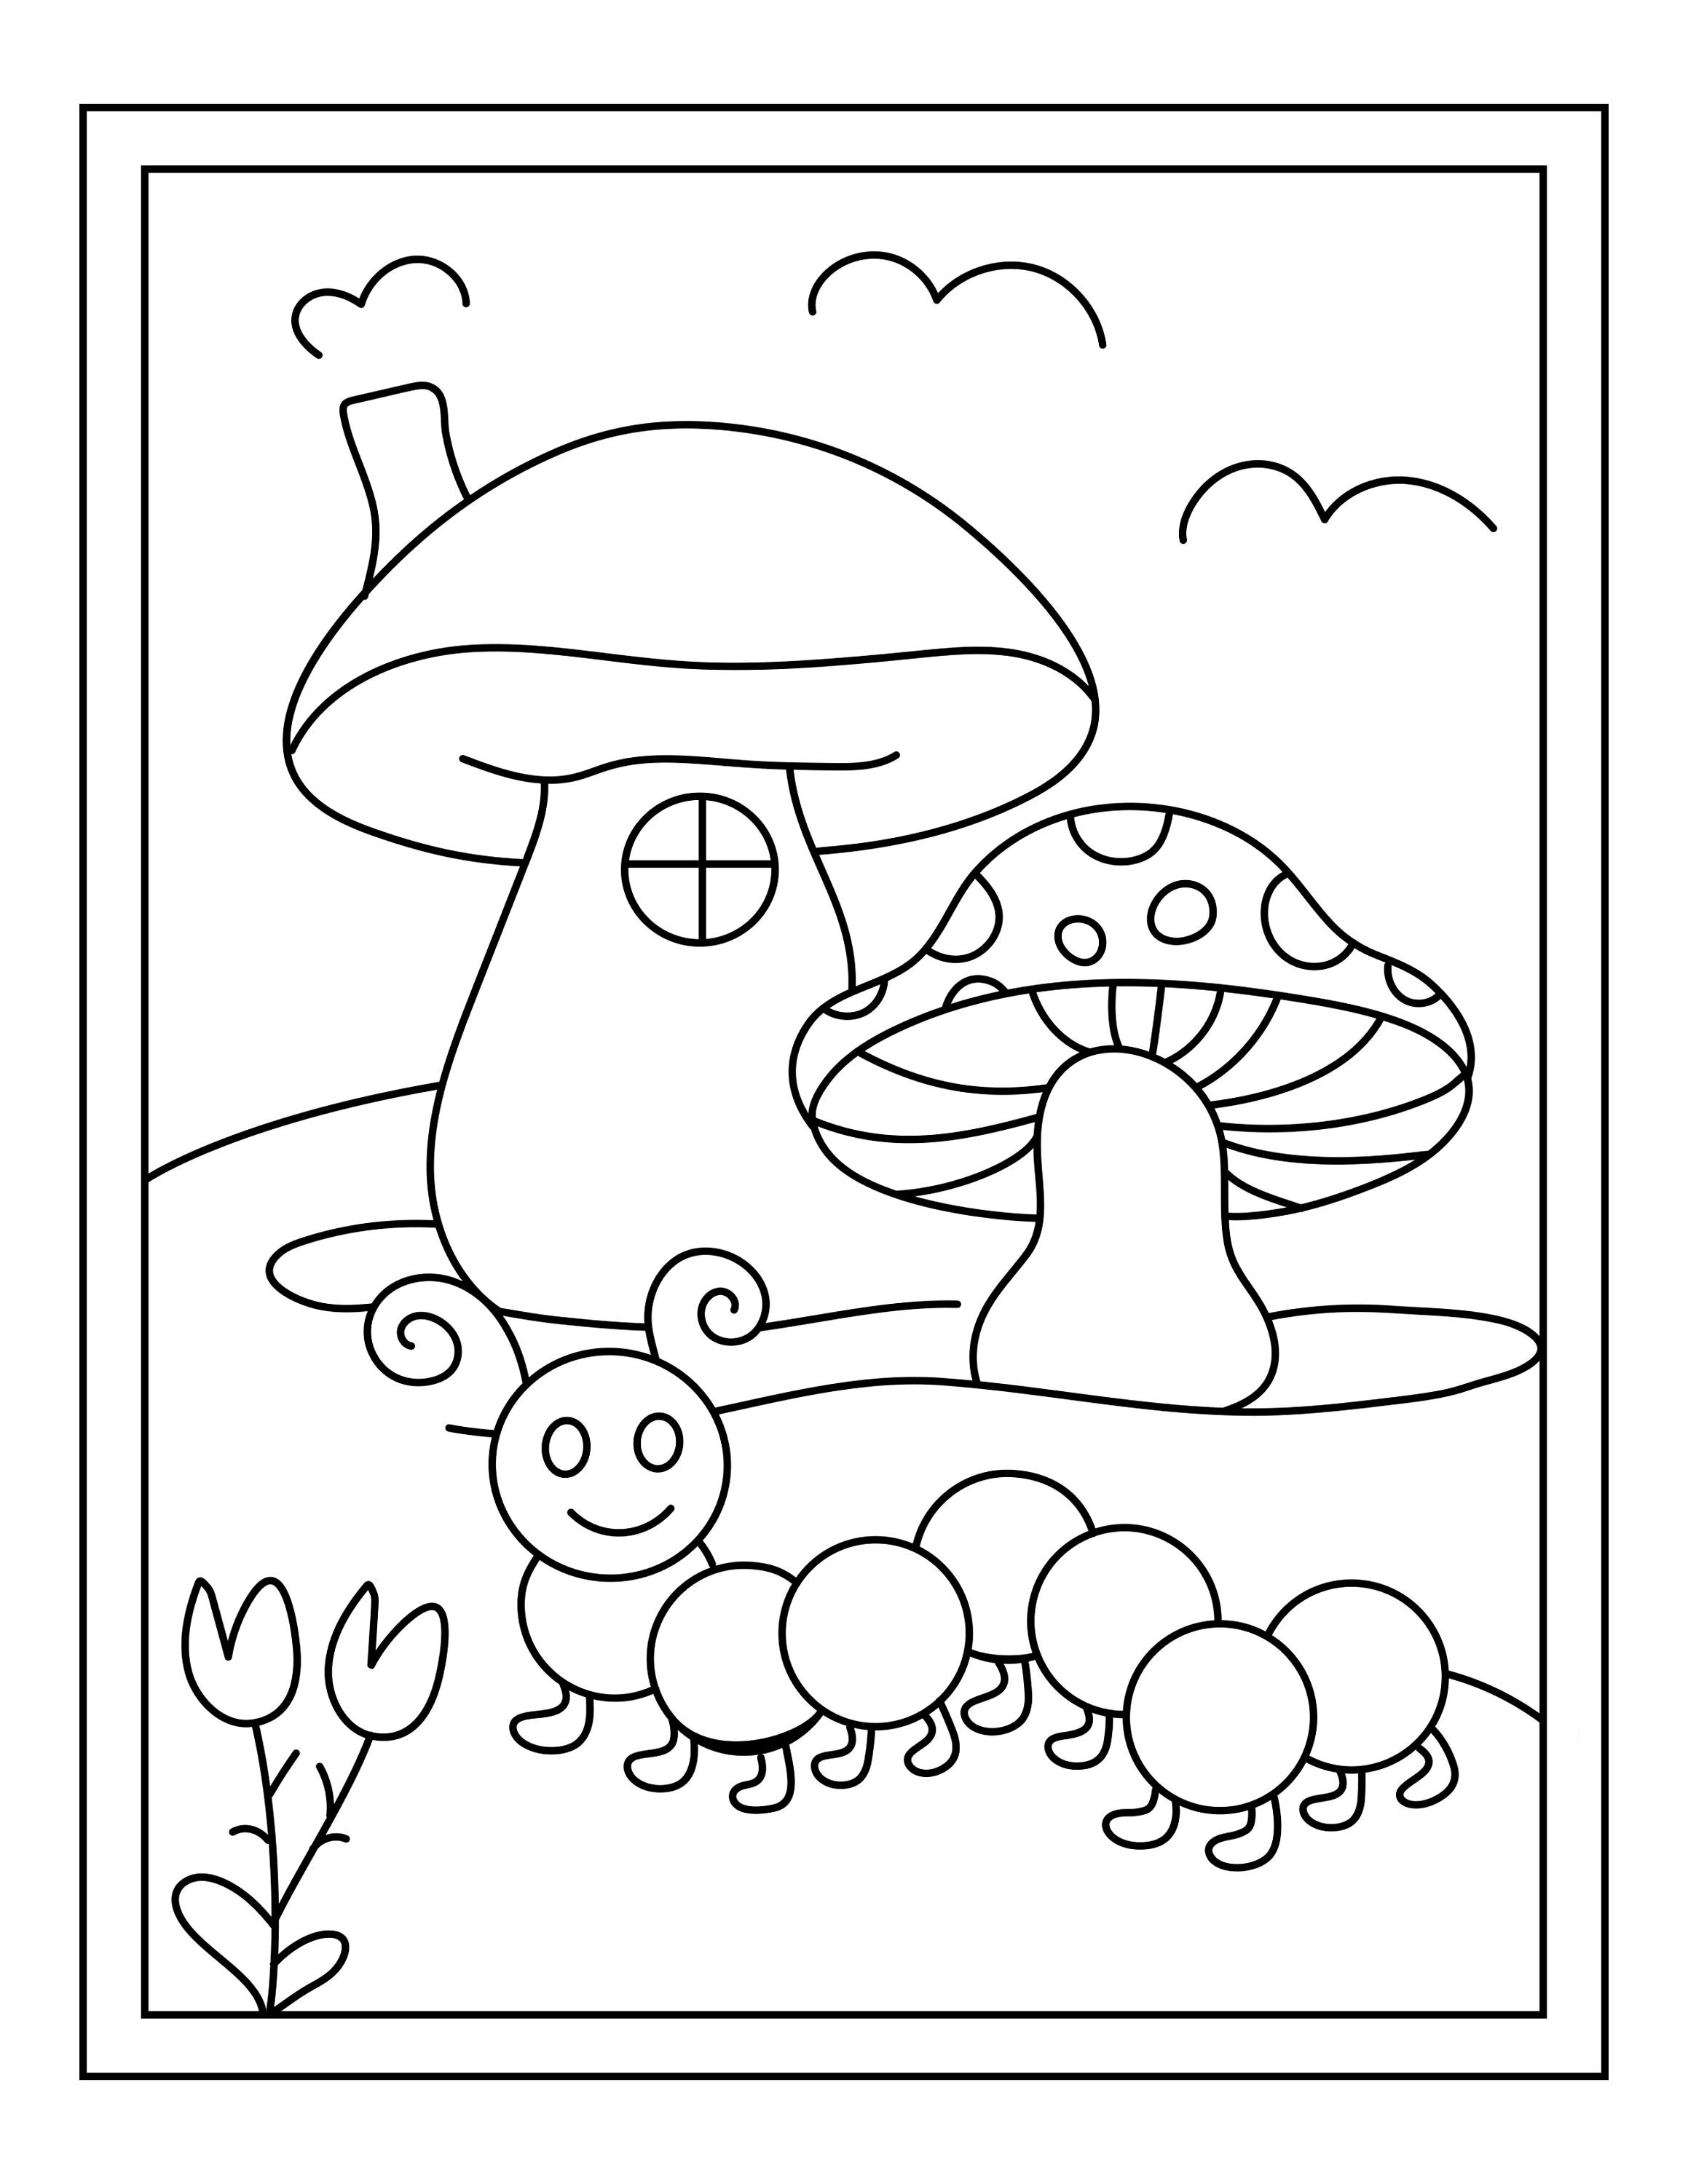 Nature Printable 16 Coloring Pages | Etsy